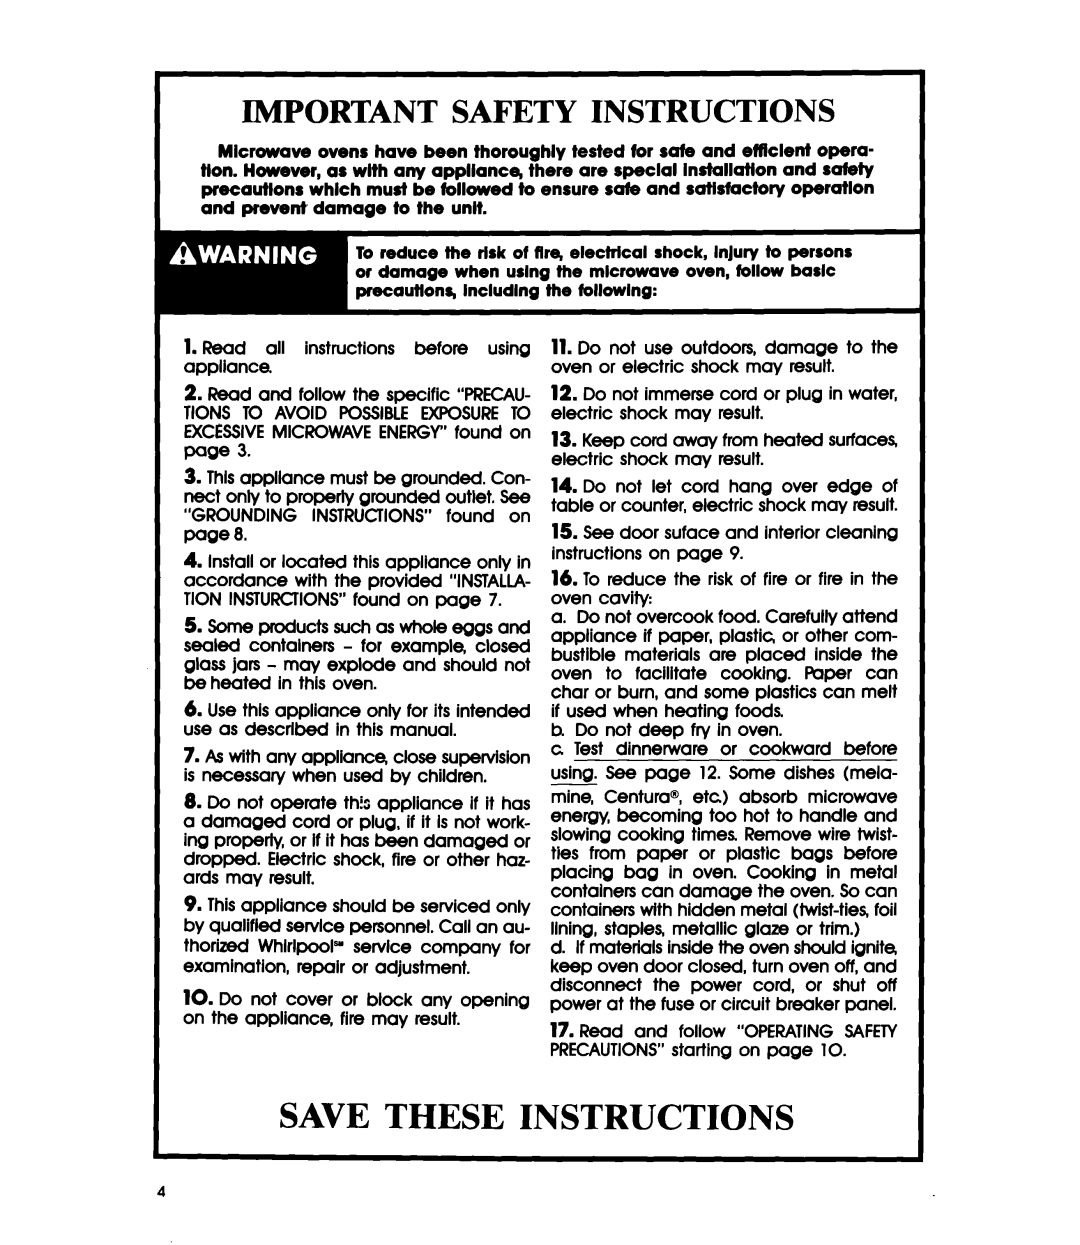 Whirlpool MW1200XW manual Save These Instructions, Important Safety Instructions 